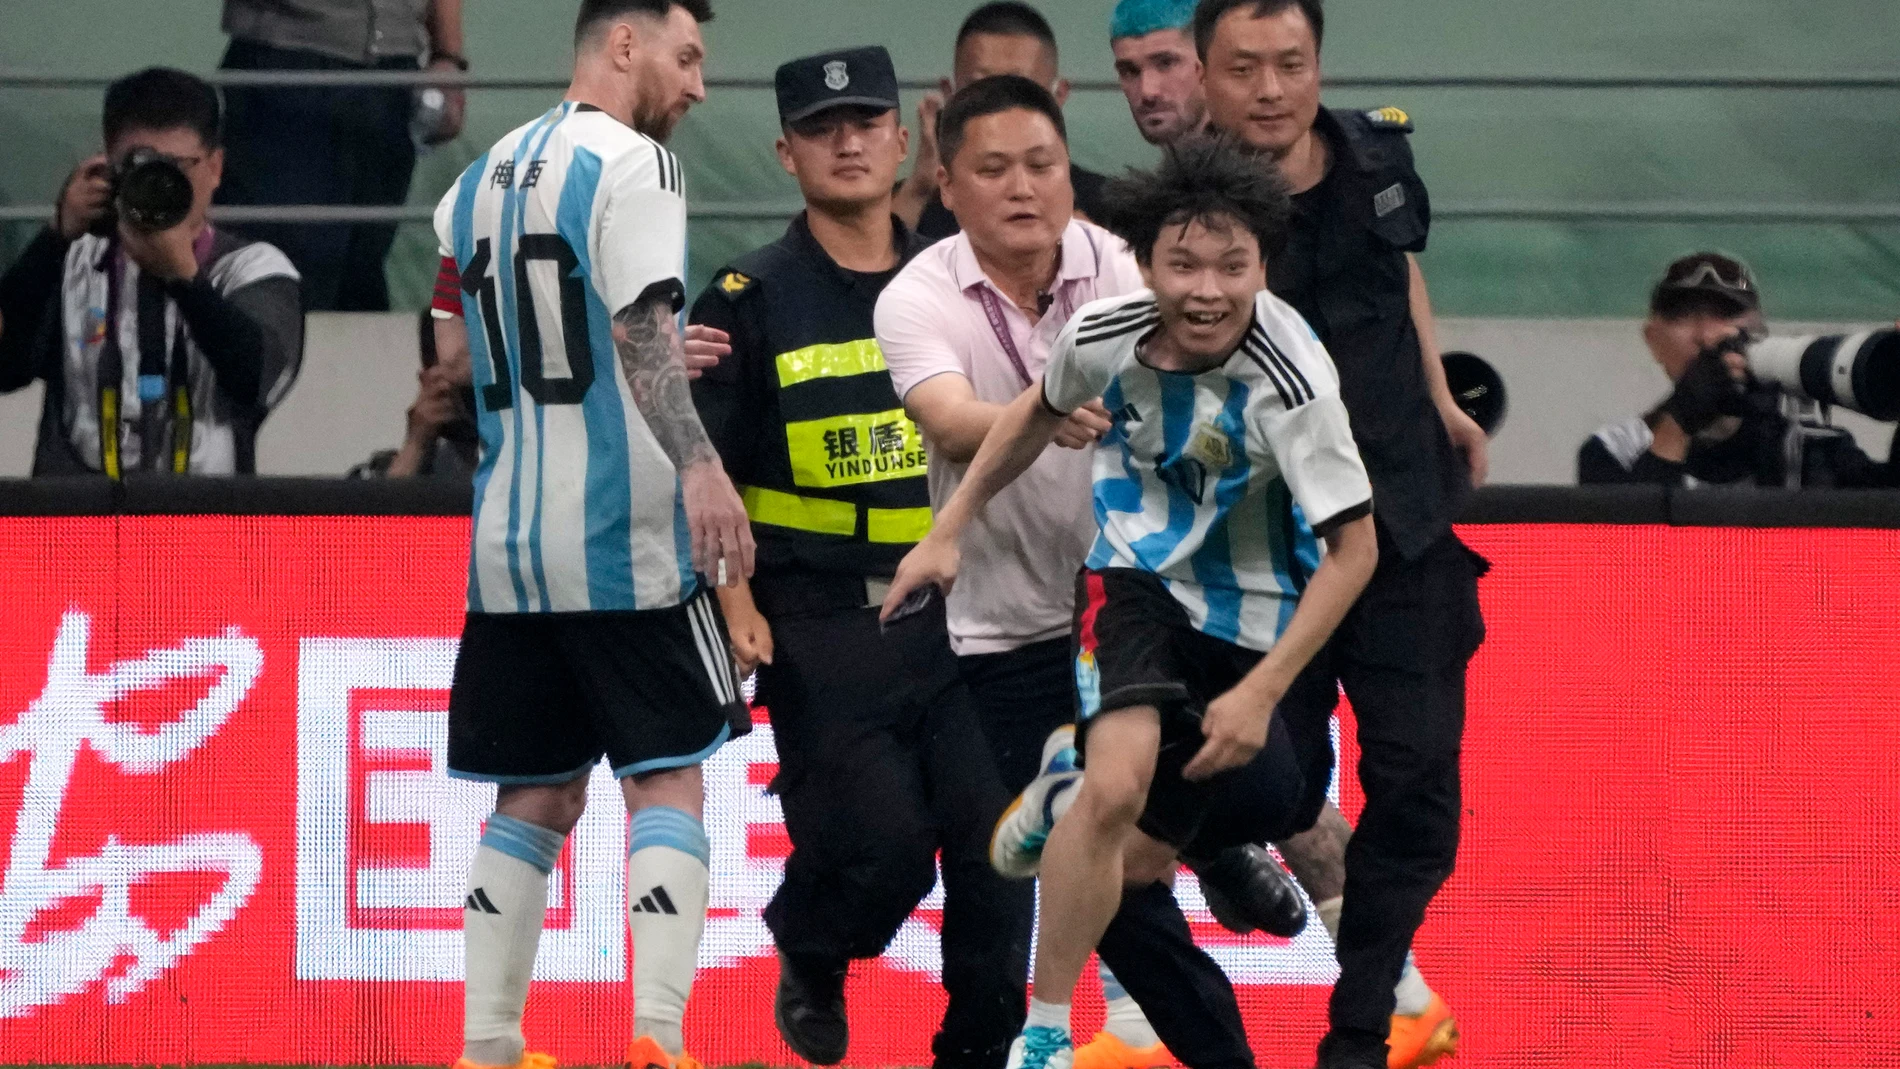 Argentina's Lionel Messi, left, watches as security officers pursue a fan during play on the field in their friendly soccer match against Australia at Workers' Stadium in Beijing, Thursday, June 15, 2023. (AP Photo/Mark Schiefelbein)